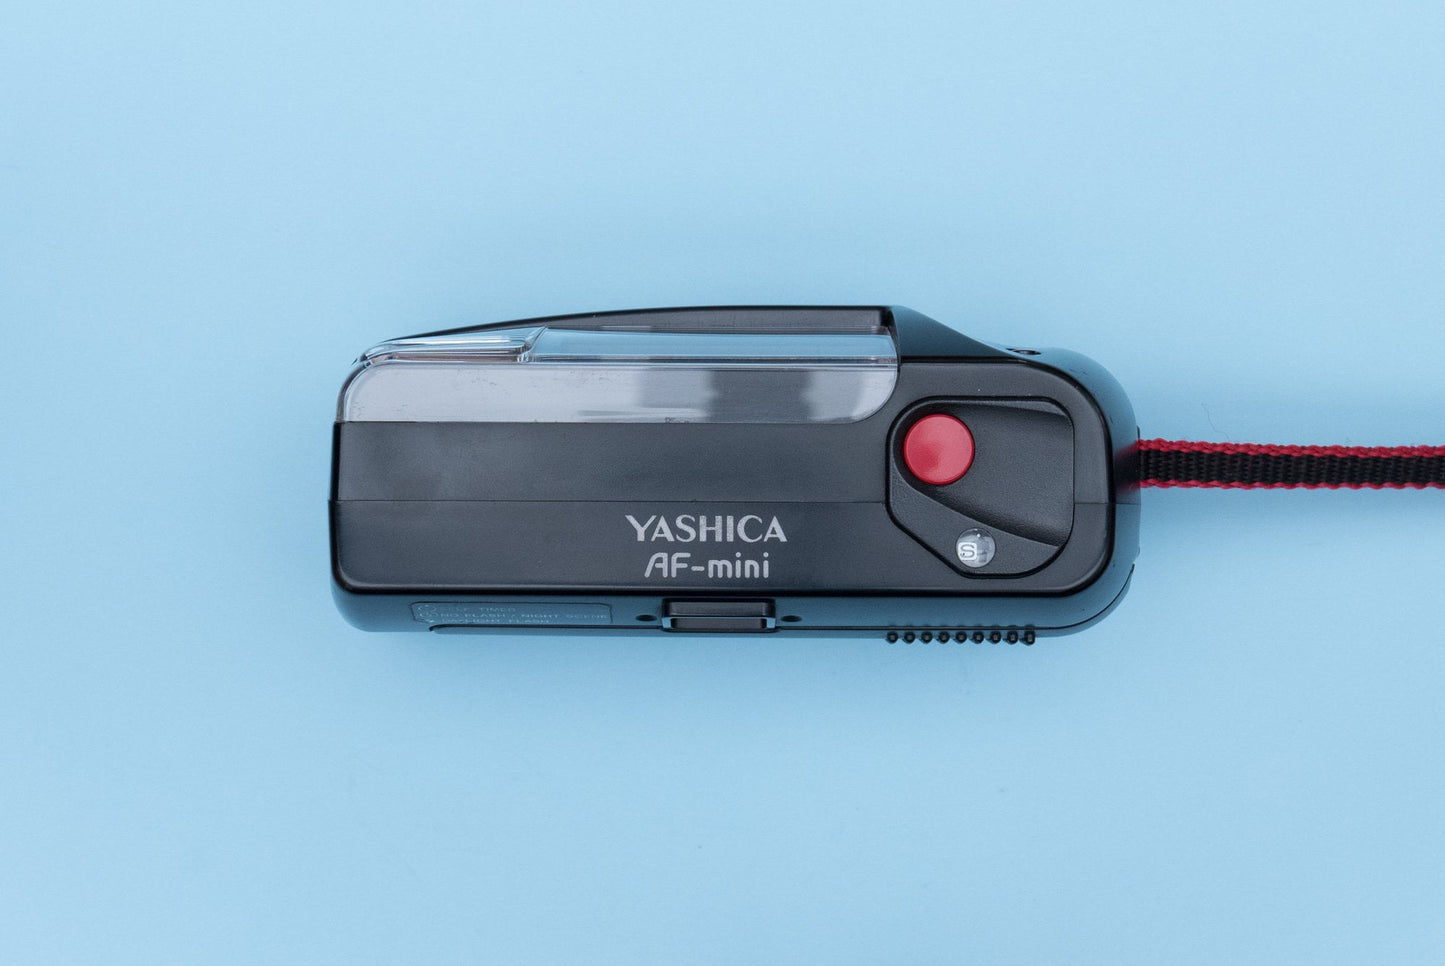 Yashica AF-mini 35mm Point and Shoot Compact Film Camera